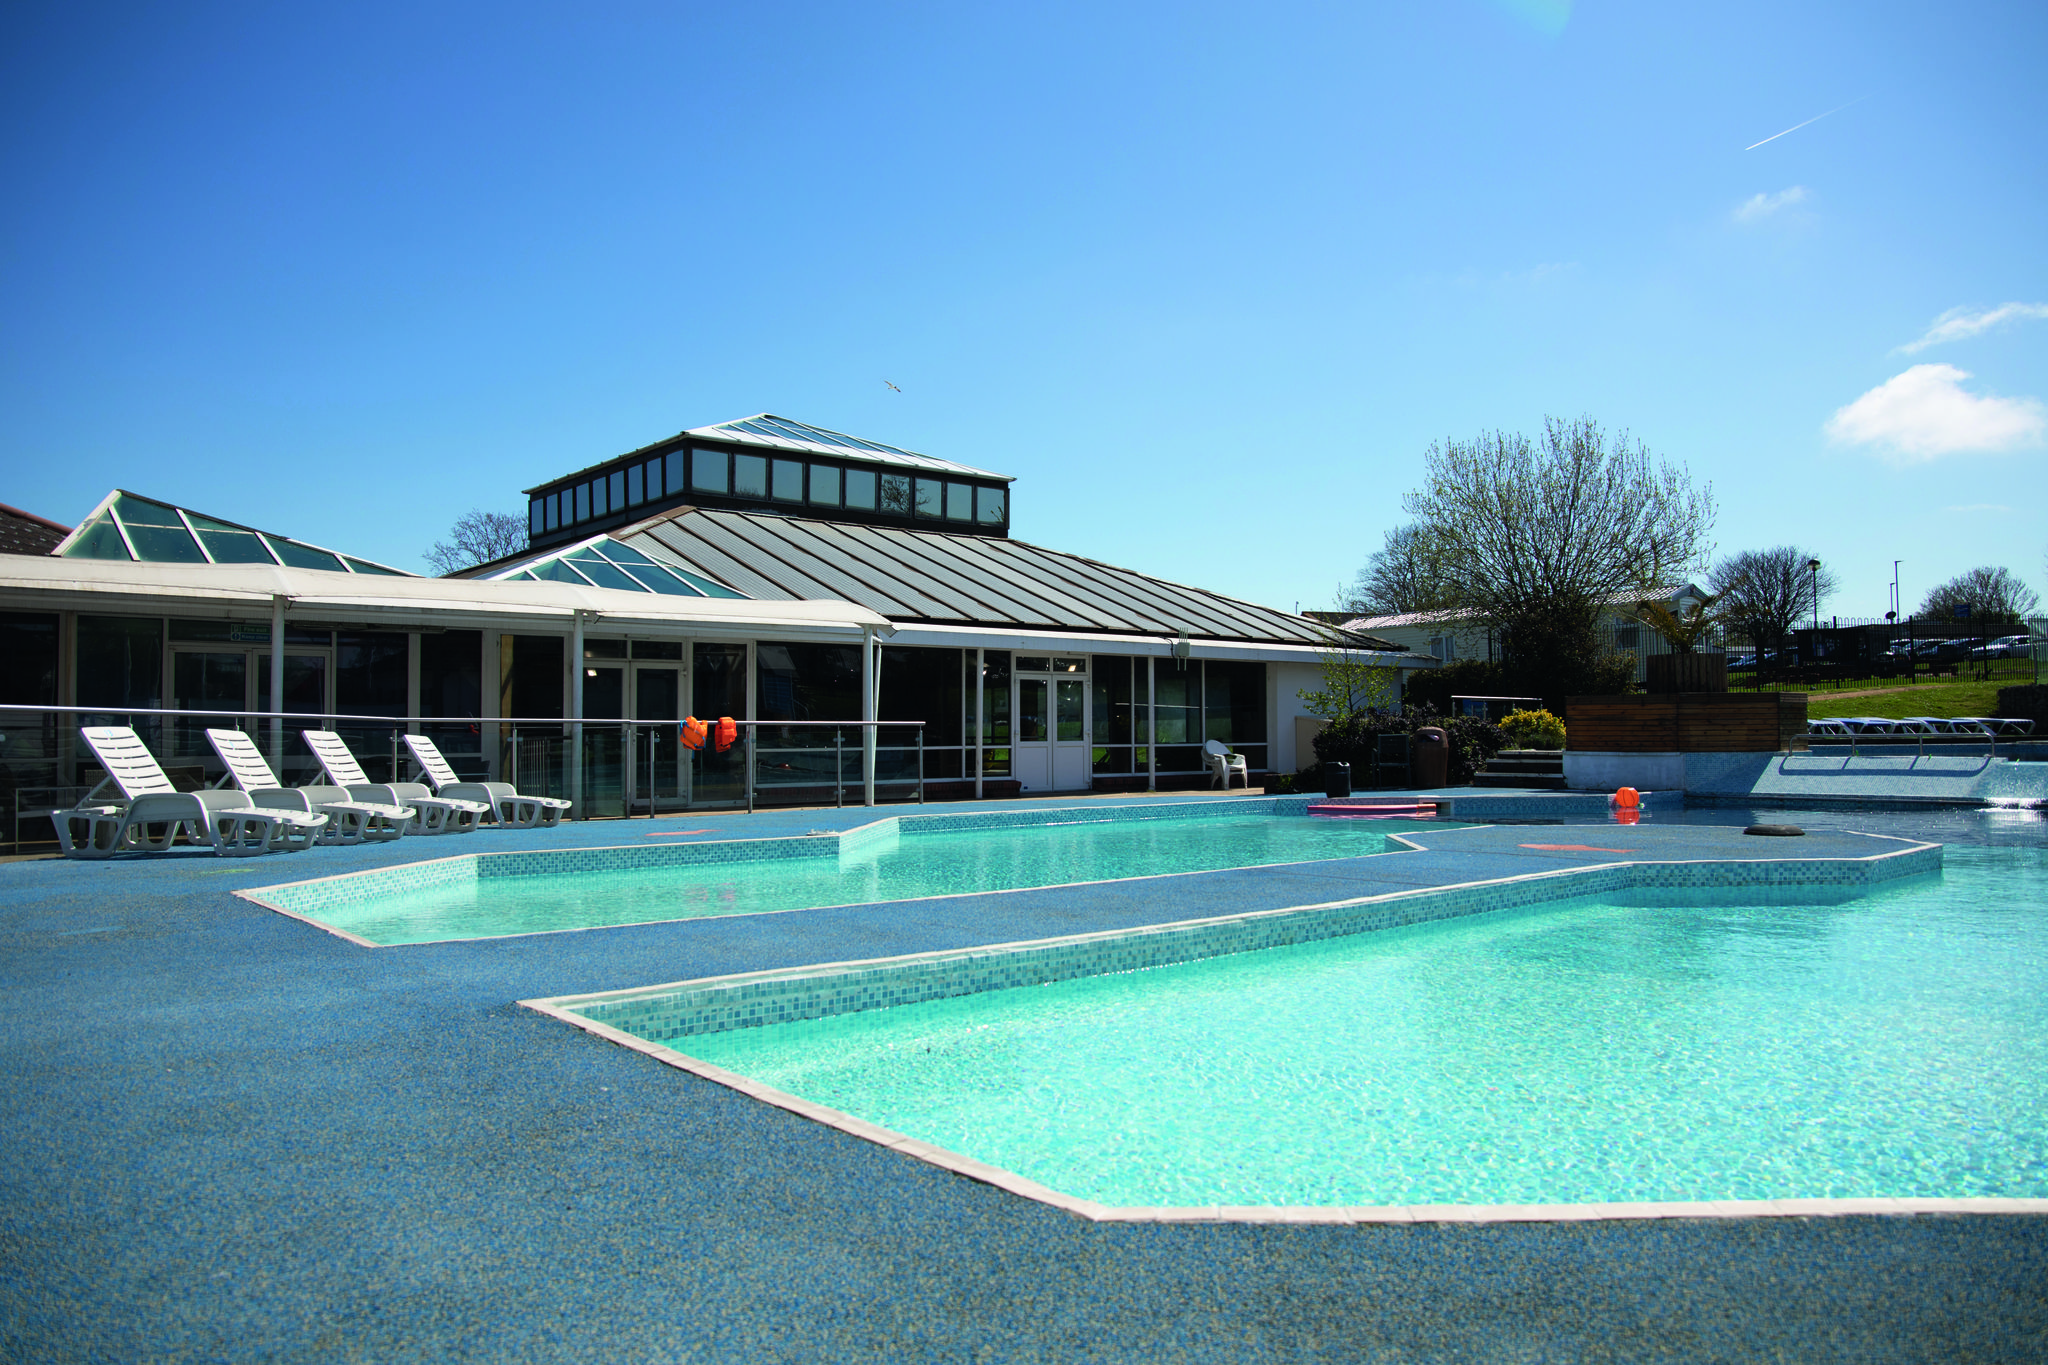 The holiday park has undergone a major refurbishment and has two swimming pools